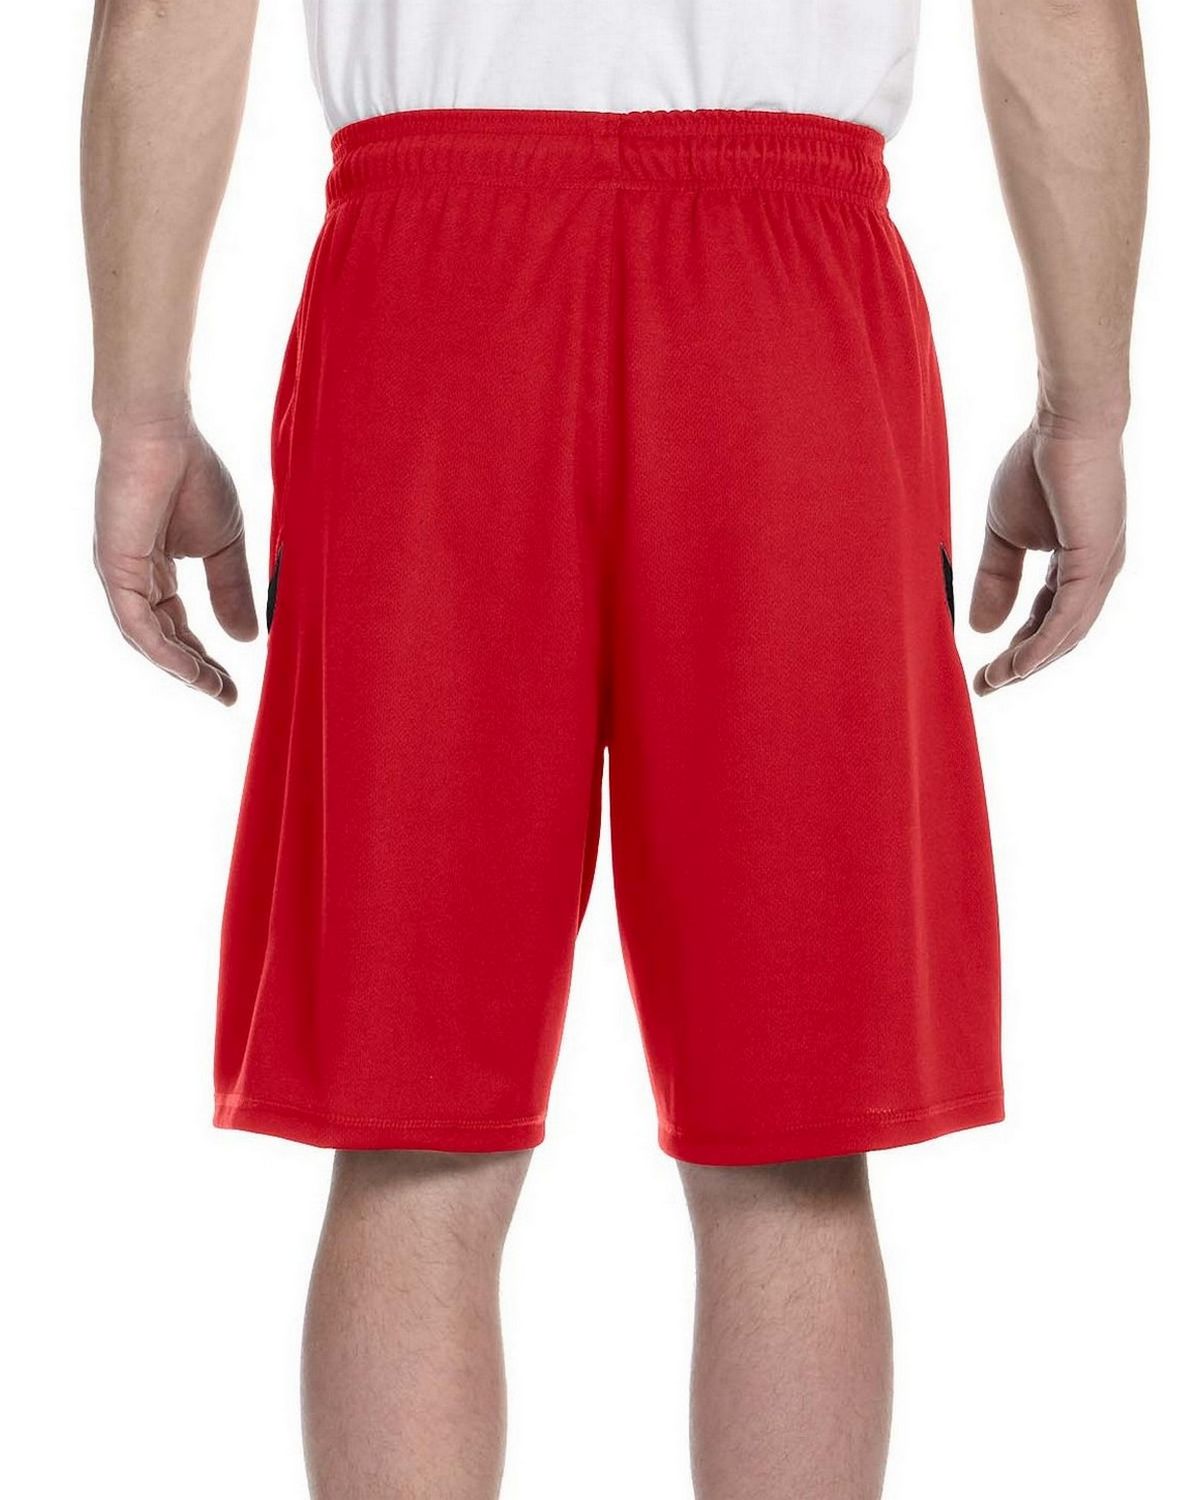 Size Chart for Russell Athletic 6B4DPM Dri-Power Colorblock Short